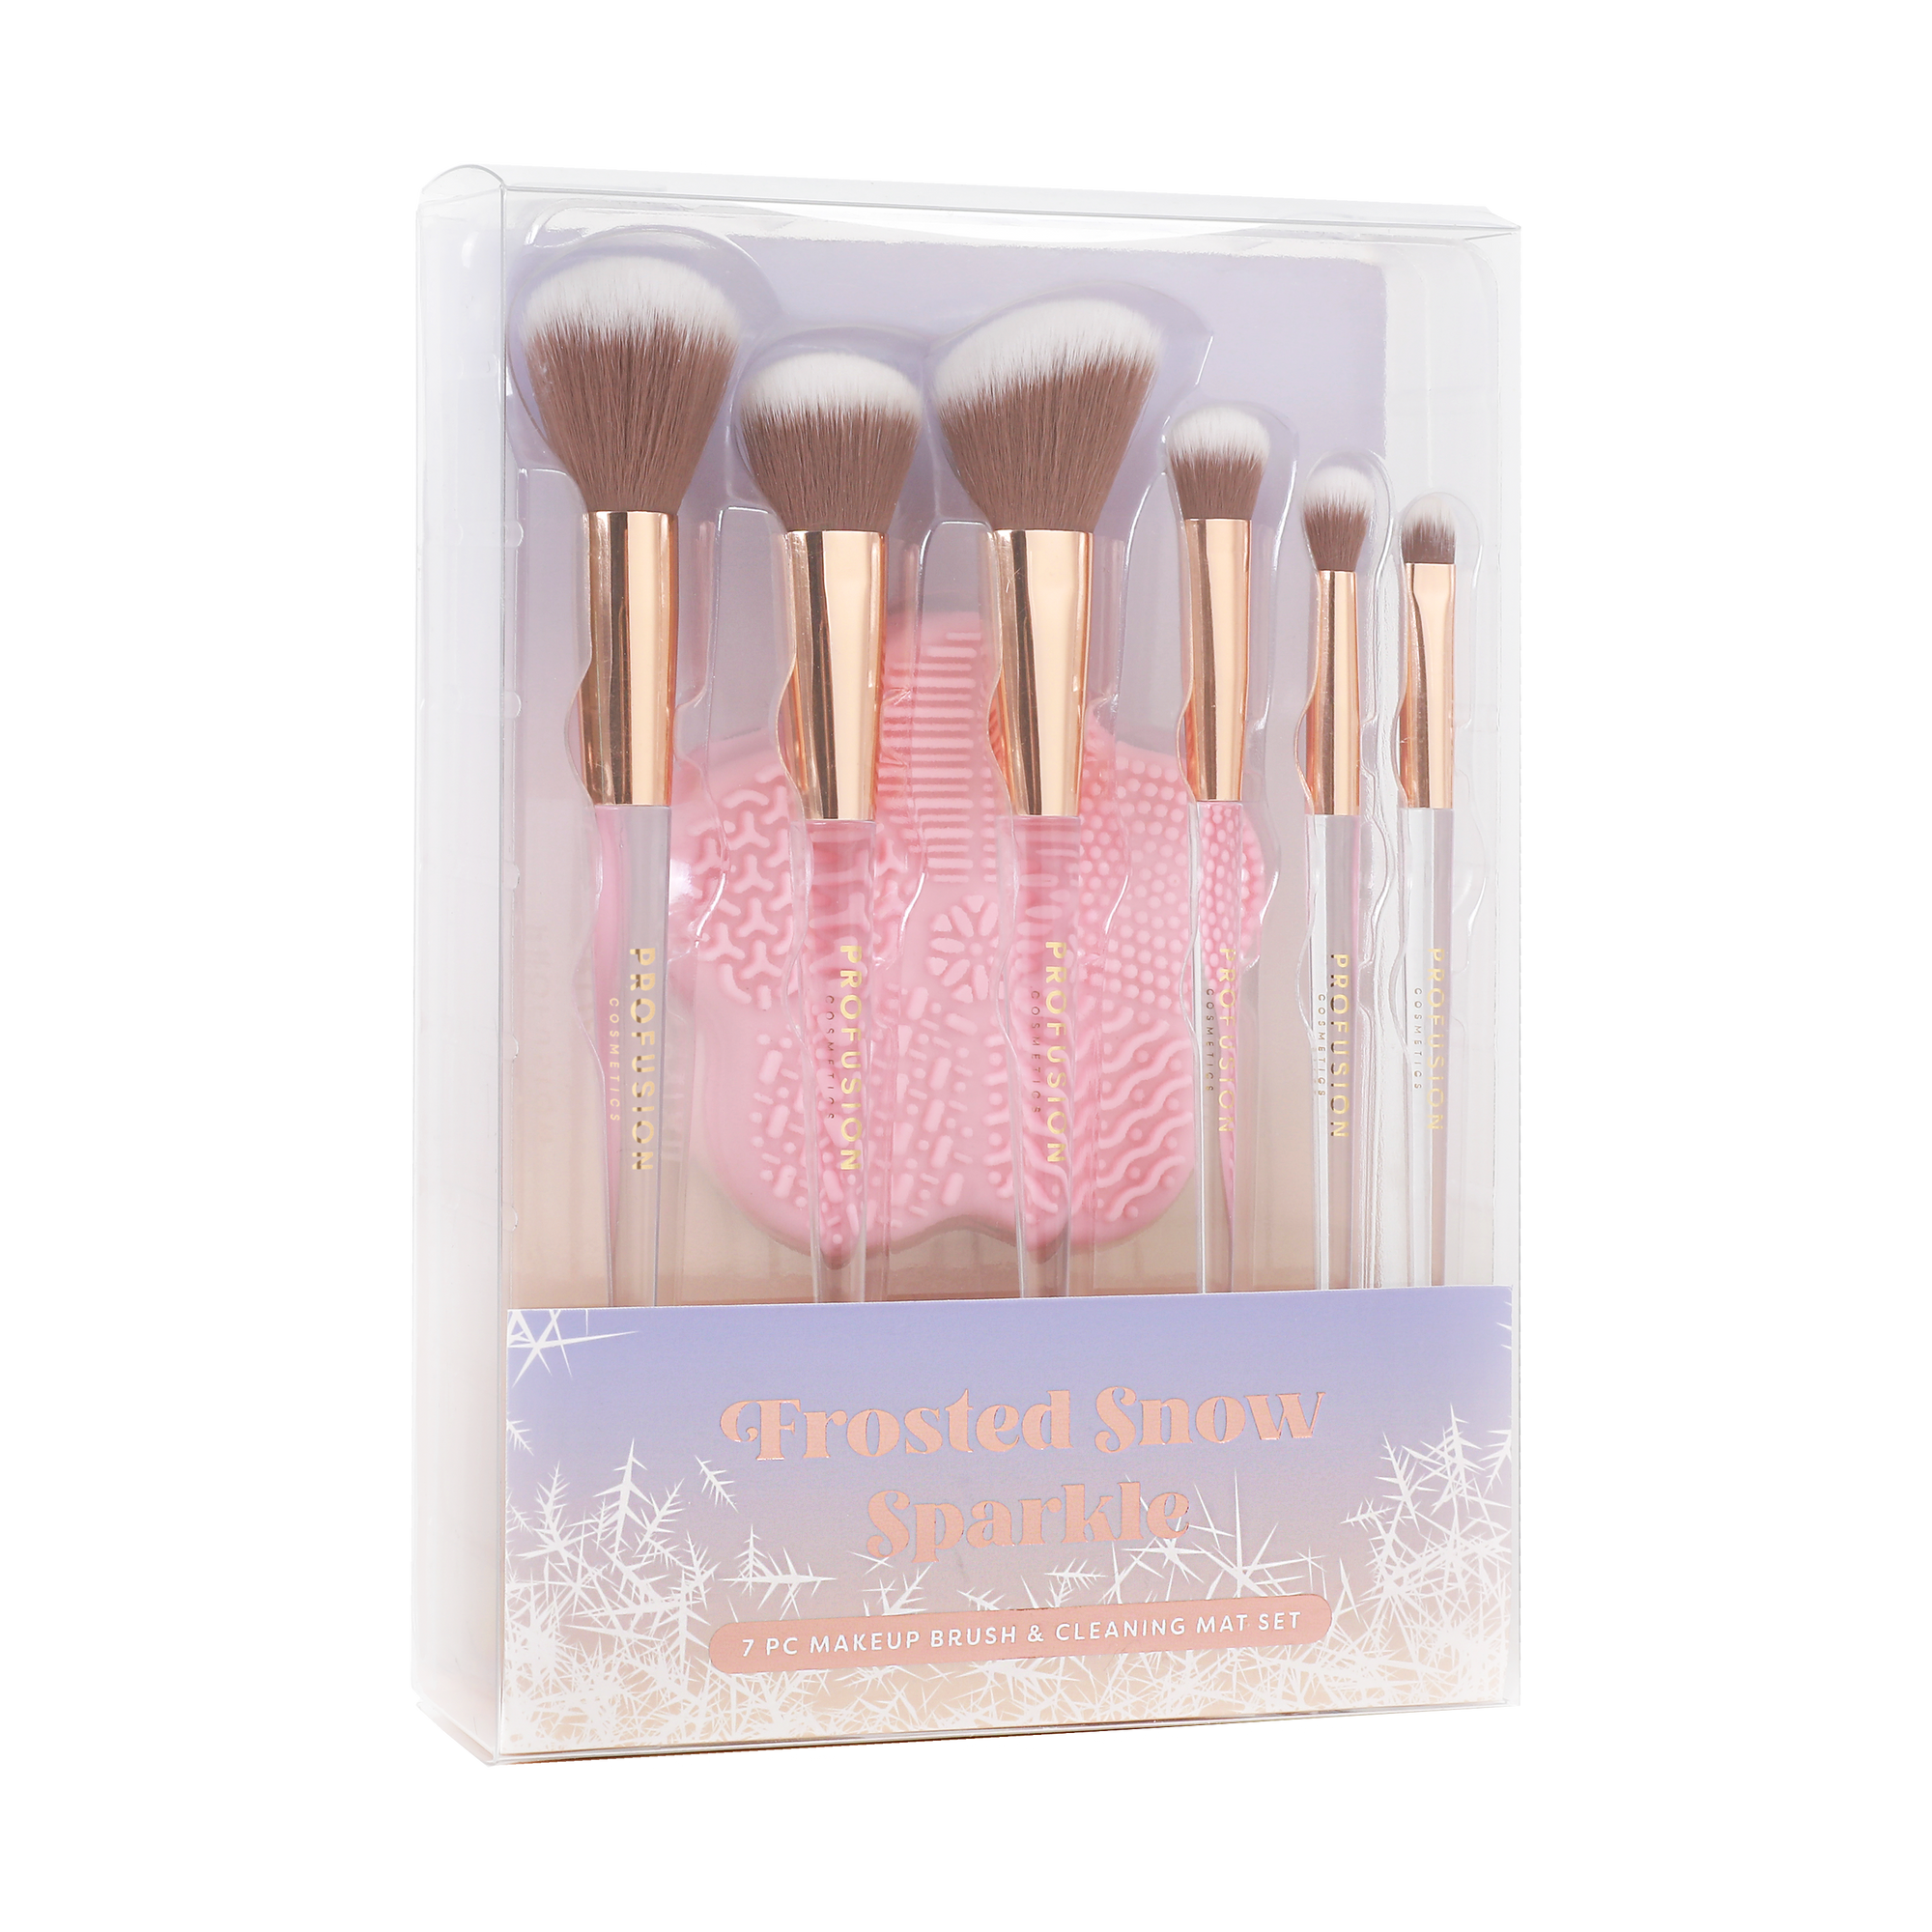 6 makeup brushes with cleaner pad in a box